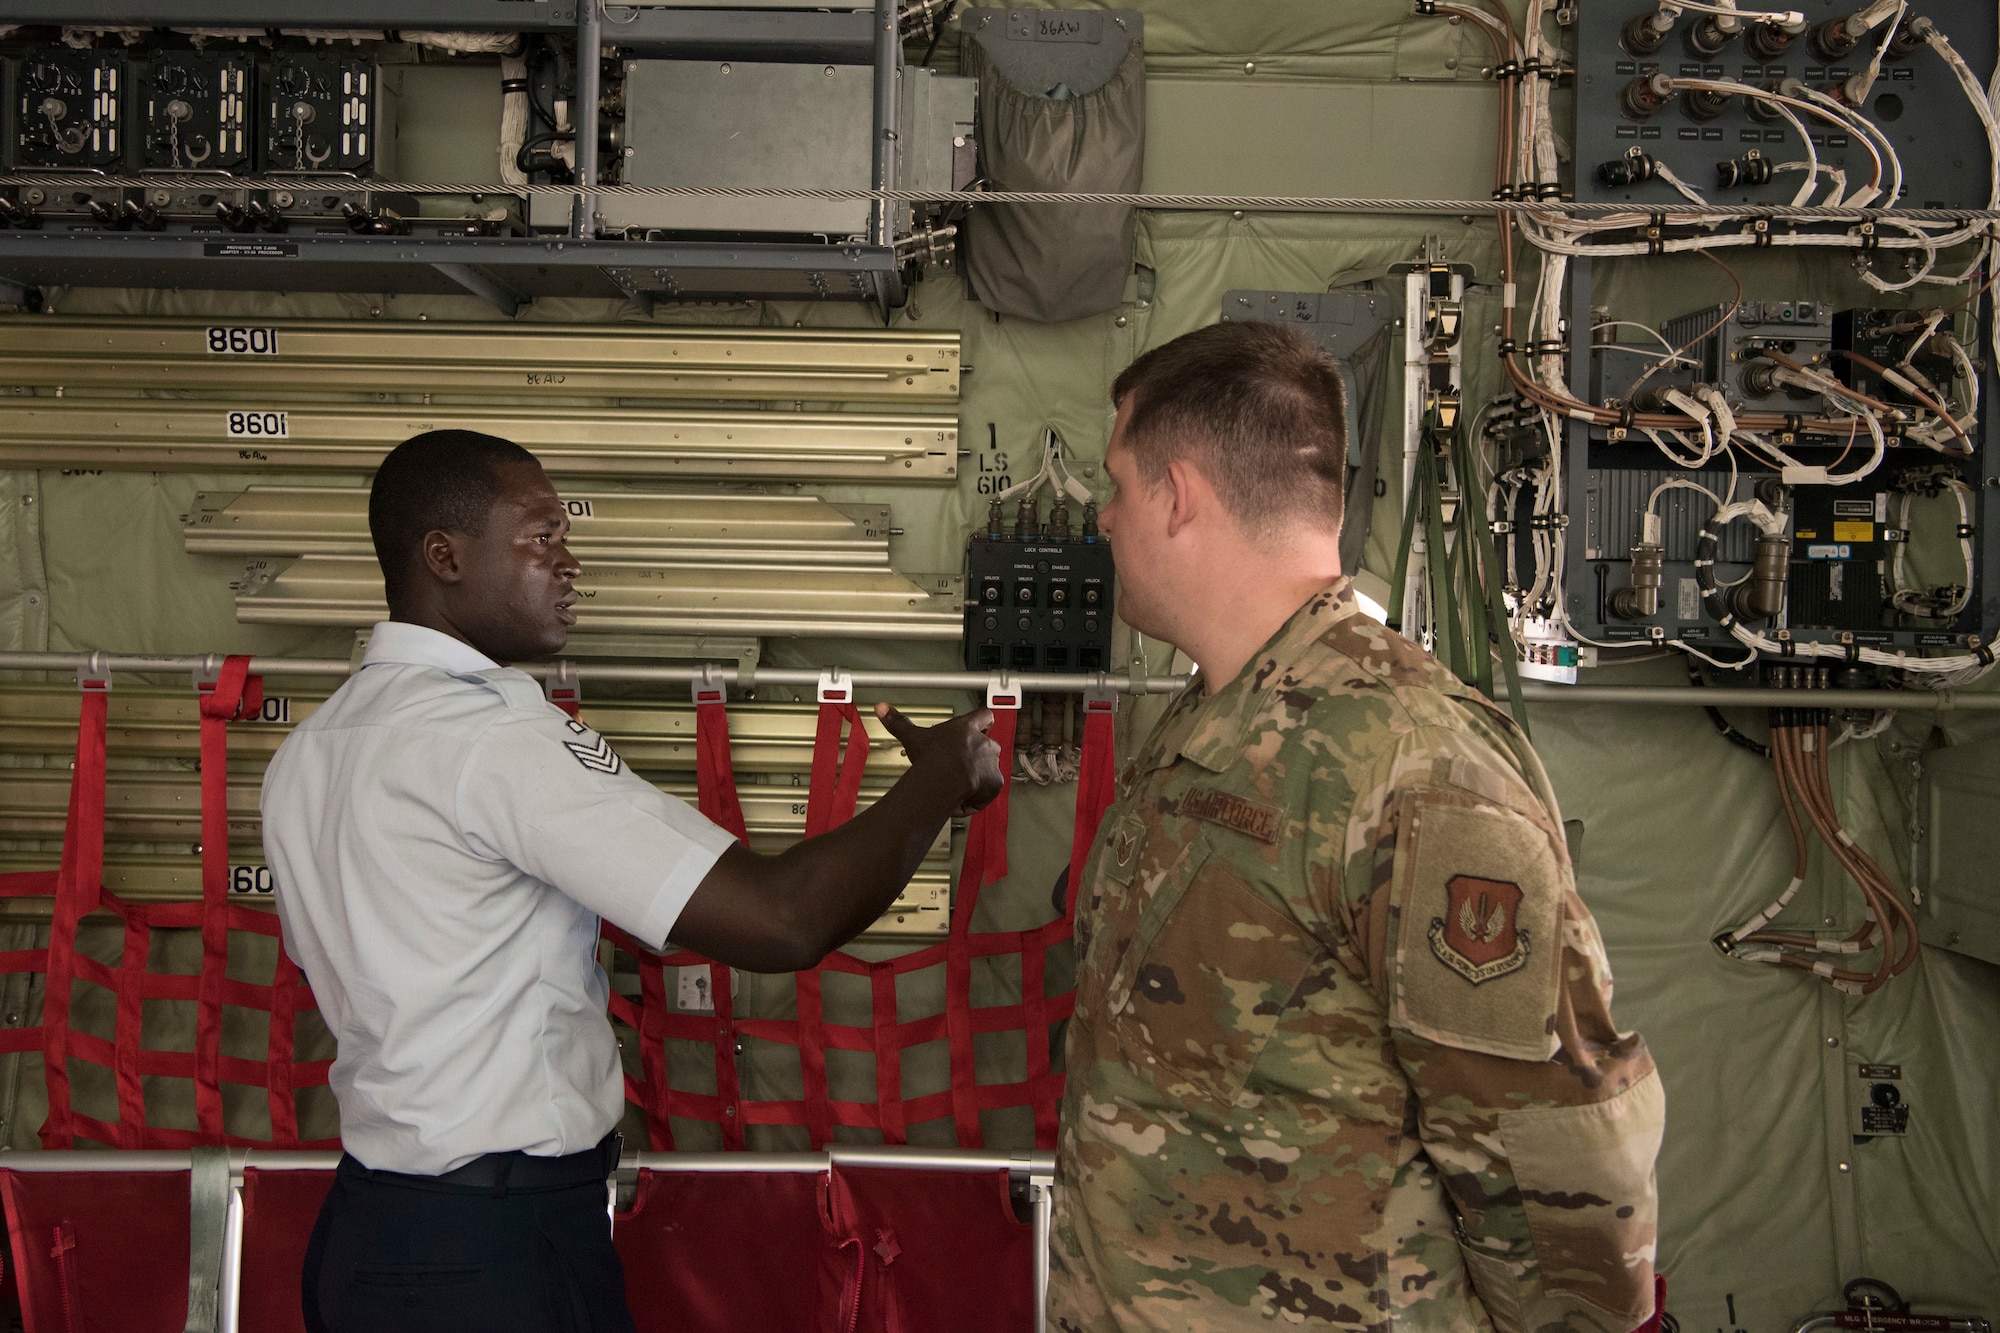 A U.S. Air Force Team Ramstein airman listens to a Ghana air force delegate as he compares the differences of the interior appearance of Ghana aircraft versus the C-130J Super Hercules he stood in on Ramstein Air Base, Germany, June 19, 2019. Over 40 air force delegates from eight different nations toured the C-130J Super Hercules as part of the African-European Partnership Flight event. (U.S. Air Force photo by Senior Airman Kristof J. Rixmann)